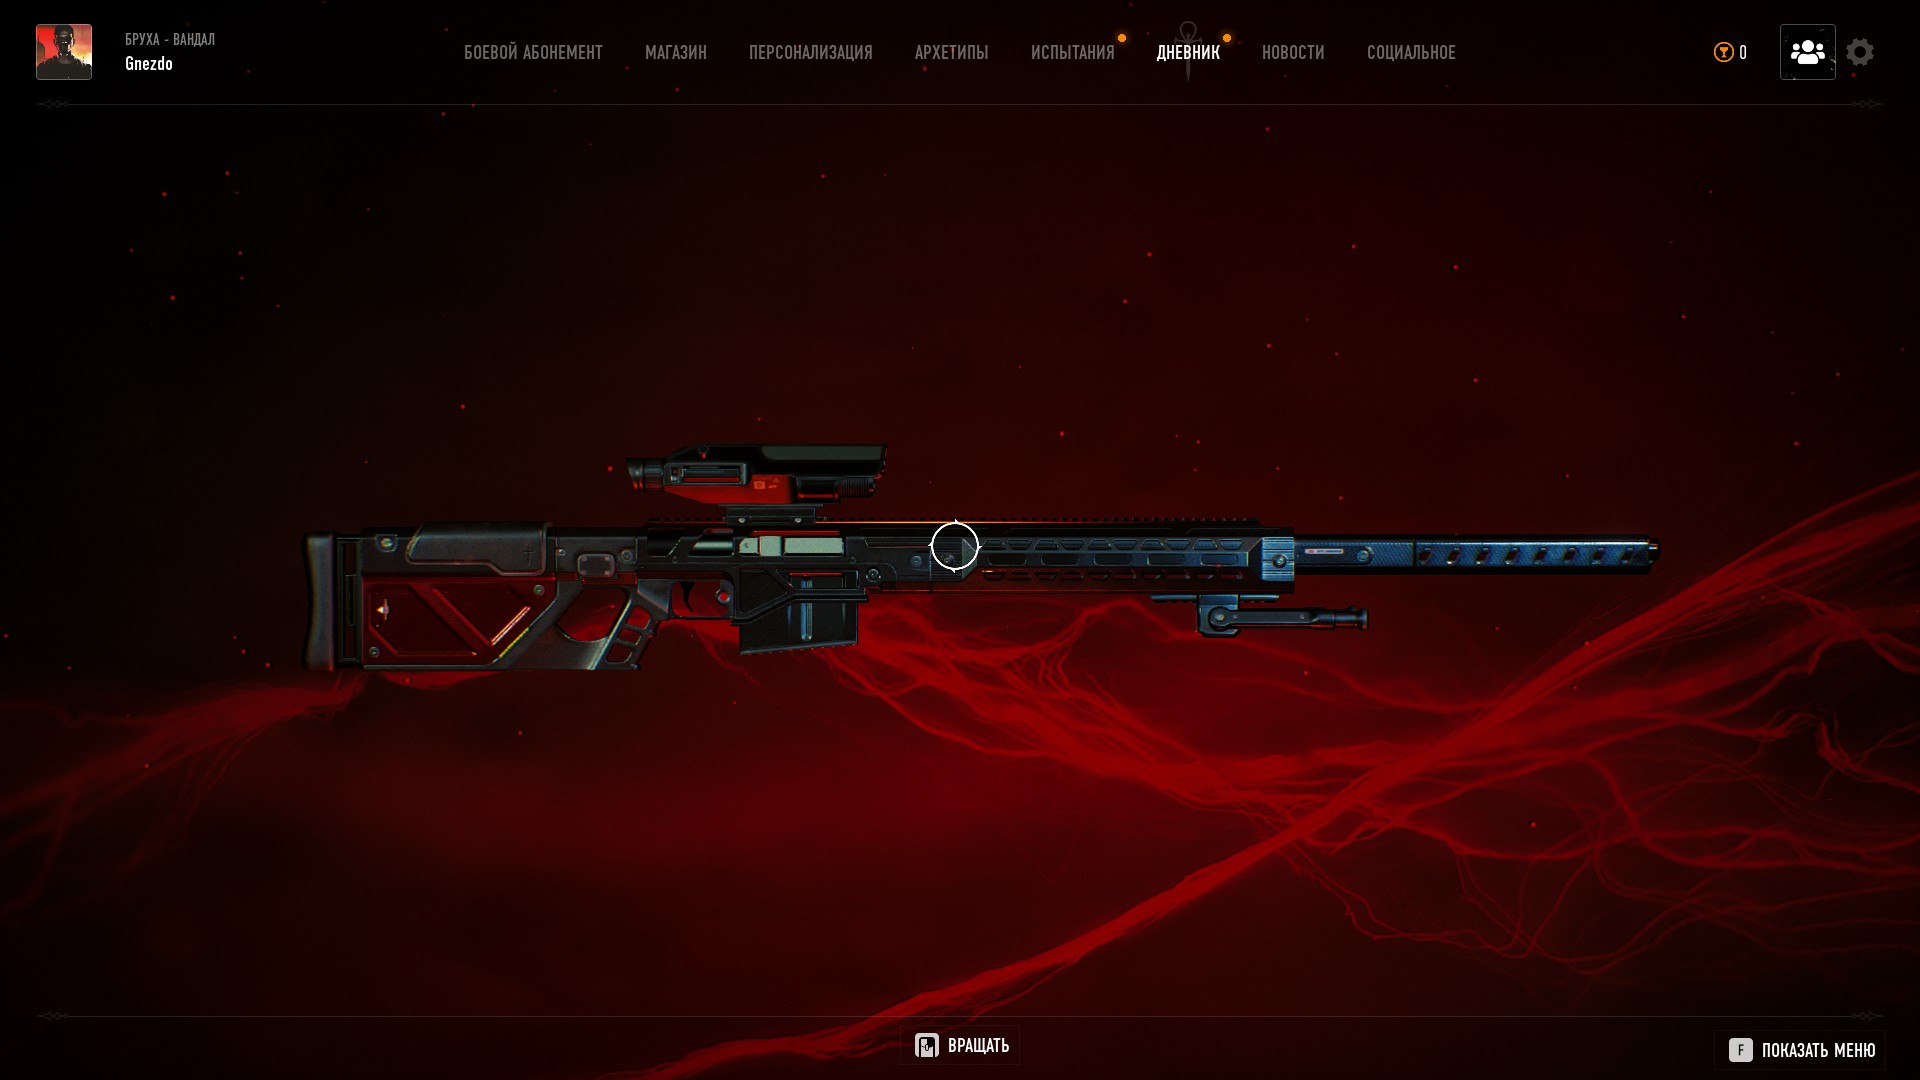 Bloodhunt All Weapon + Damage Information - sniper rifle - 2F2D317